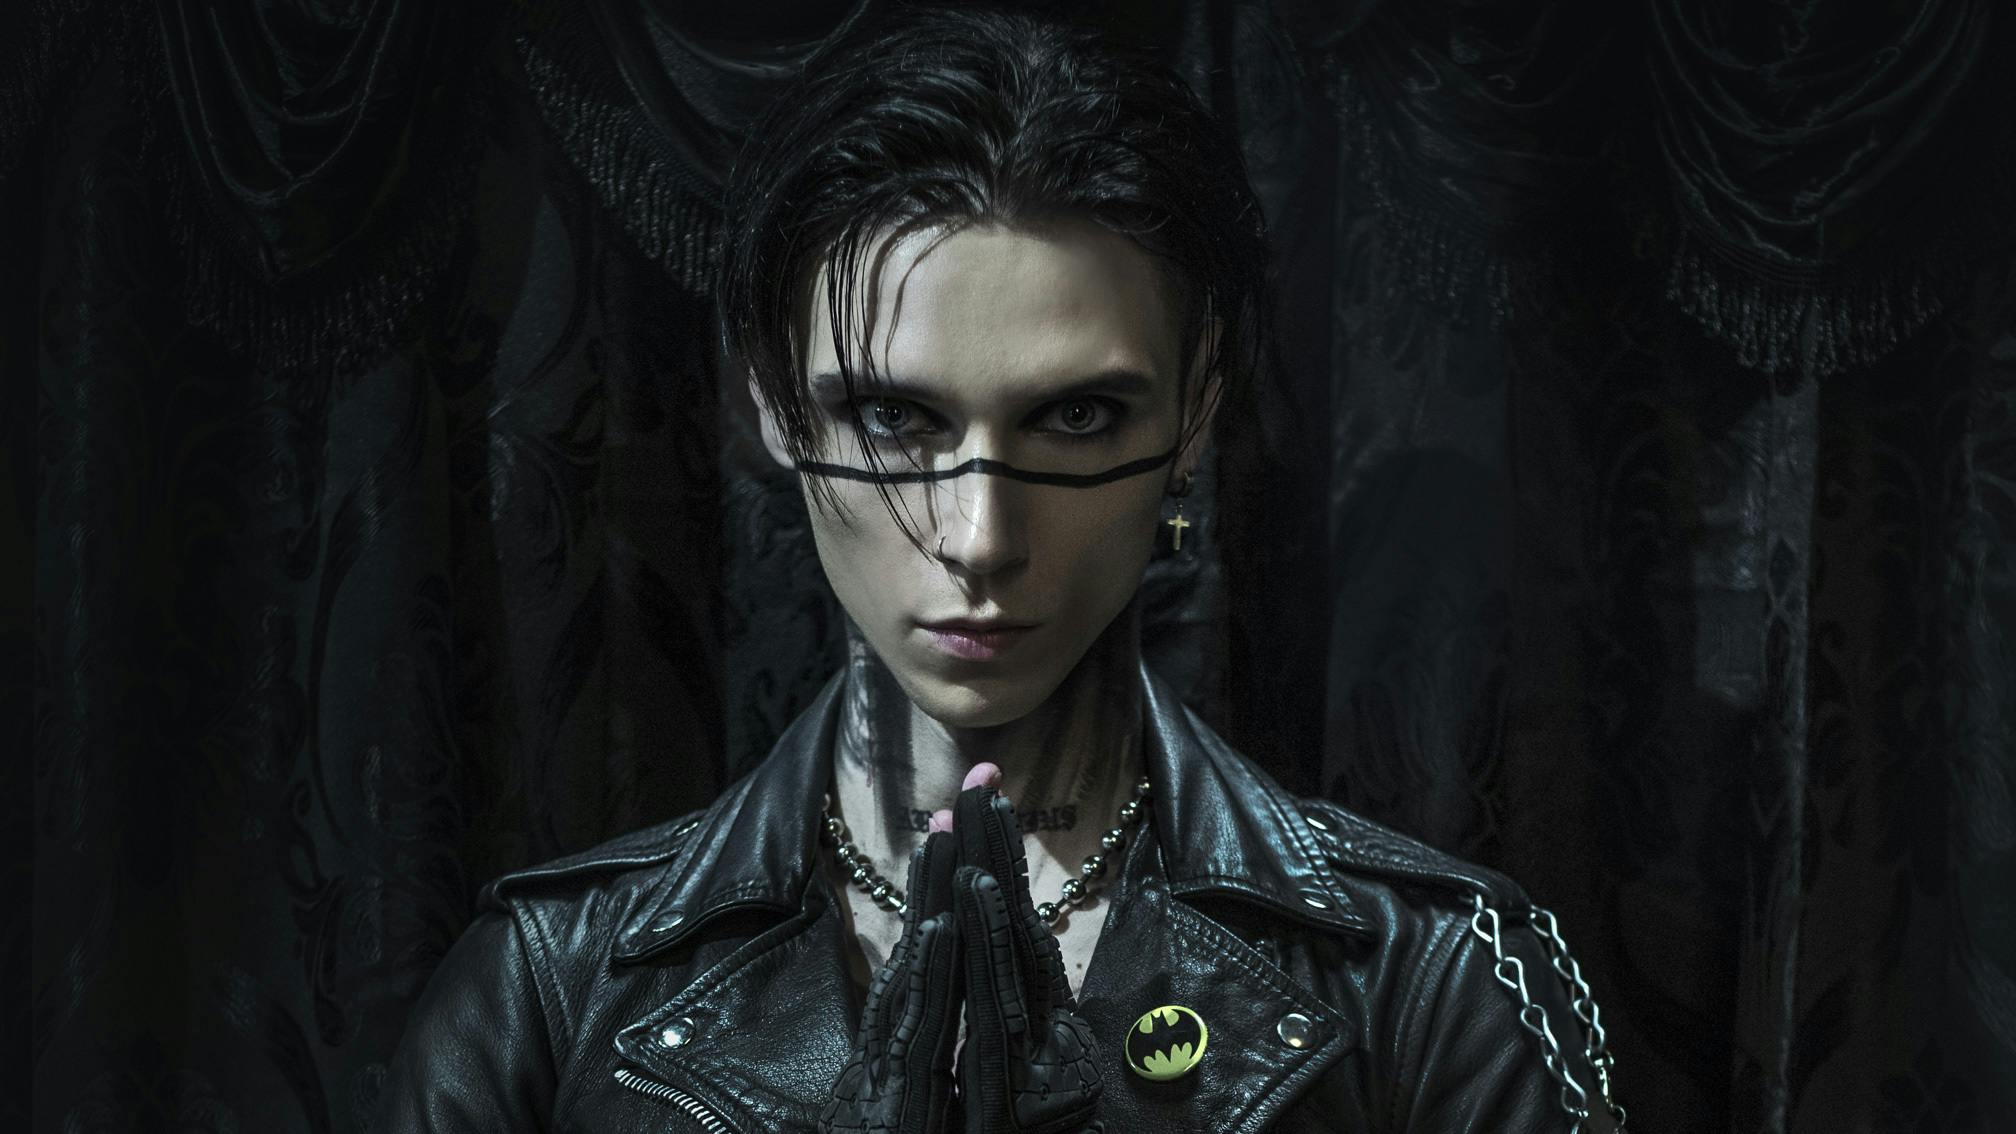 “You’re going to be happy if you remain true to who you are”: Andy Biersack writes a letter to his younger self